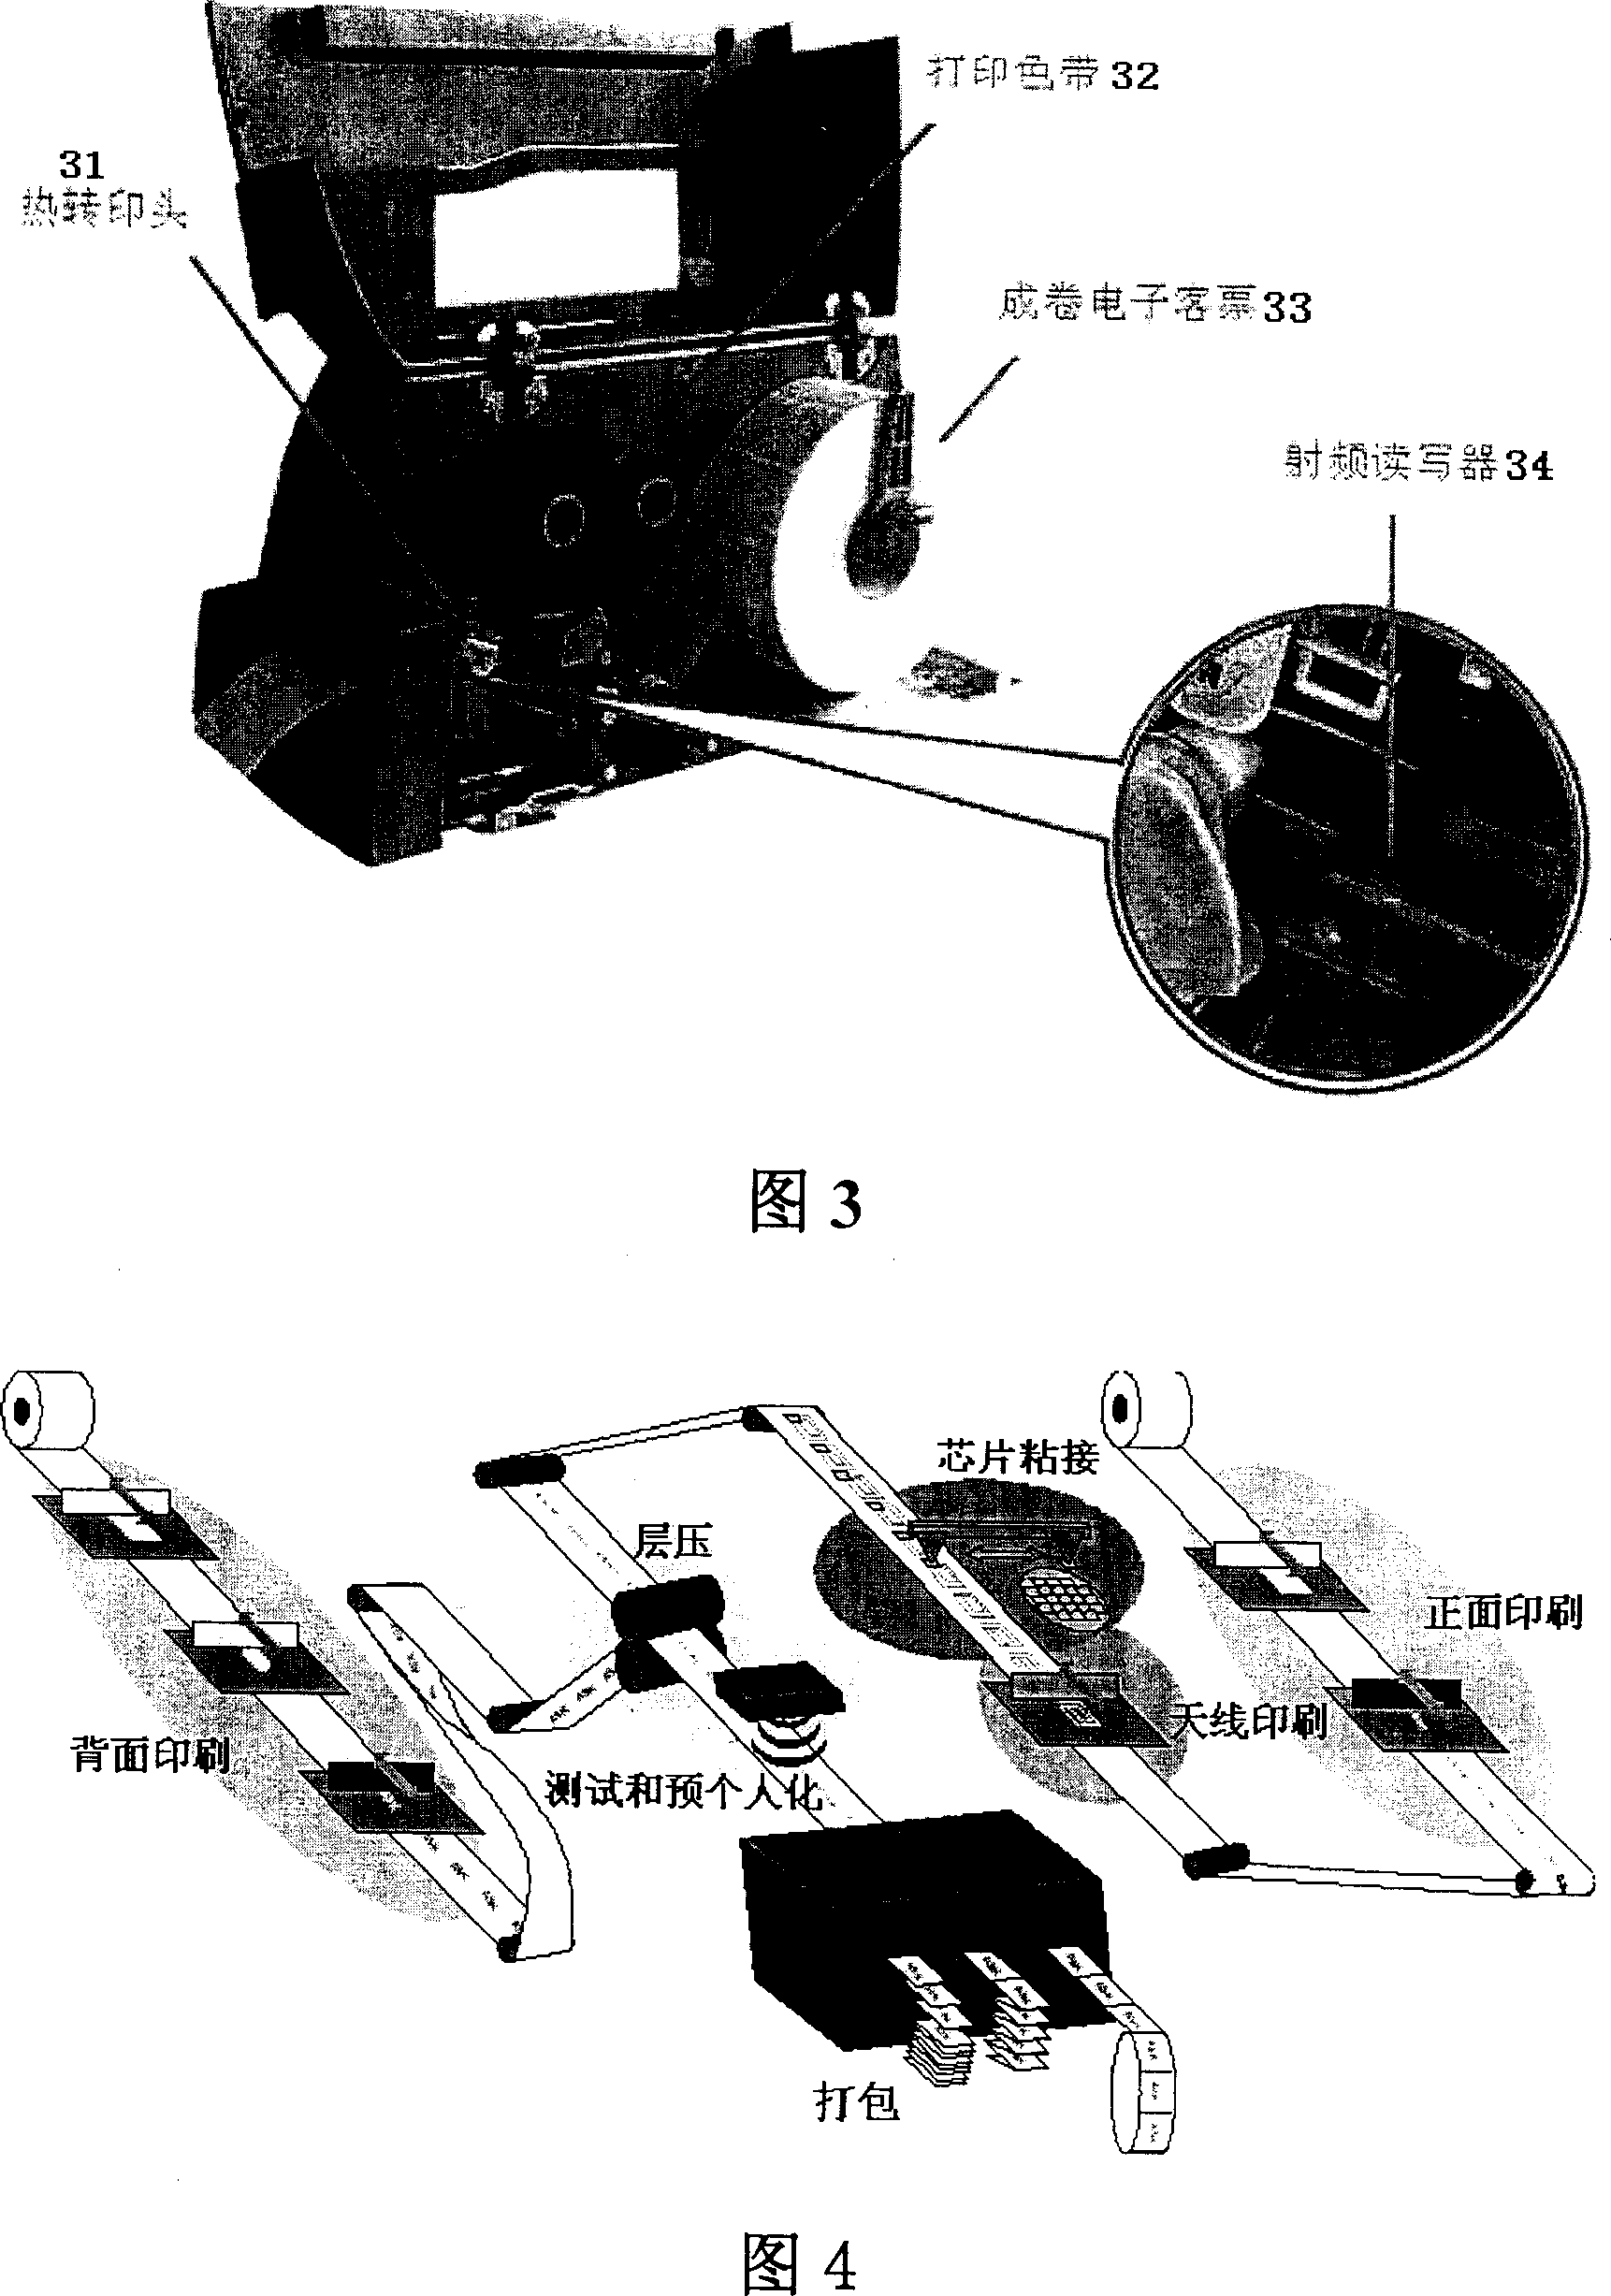 Non-contact paper base electronic passenger ticket based on electronic label technology